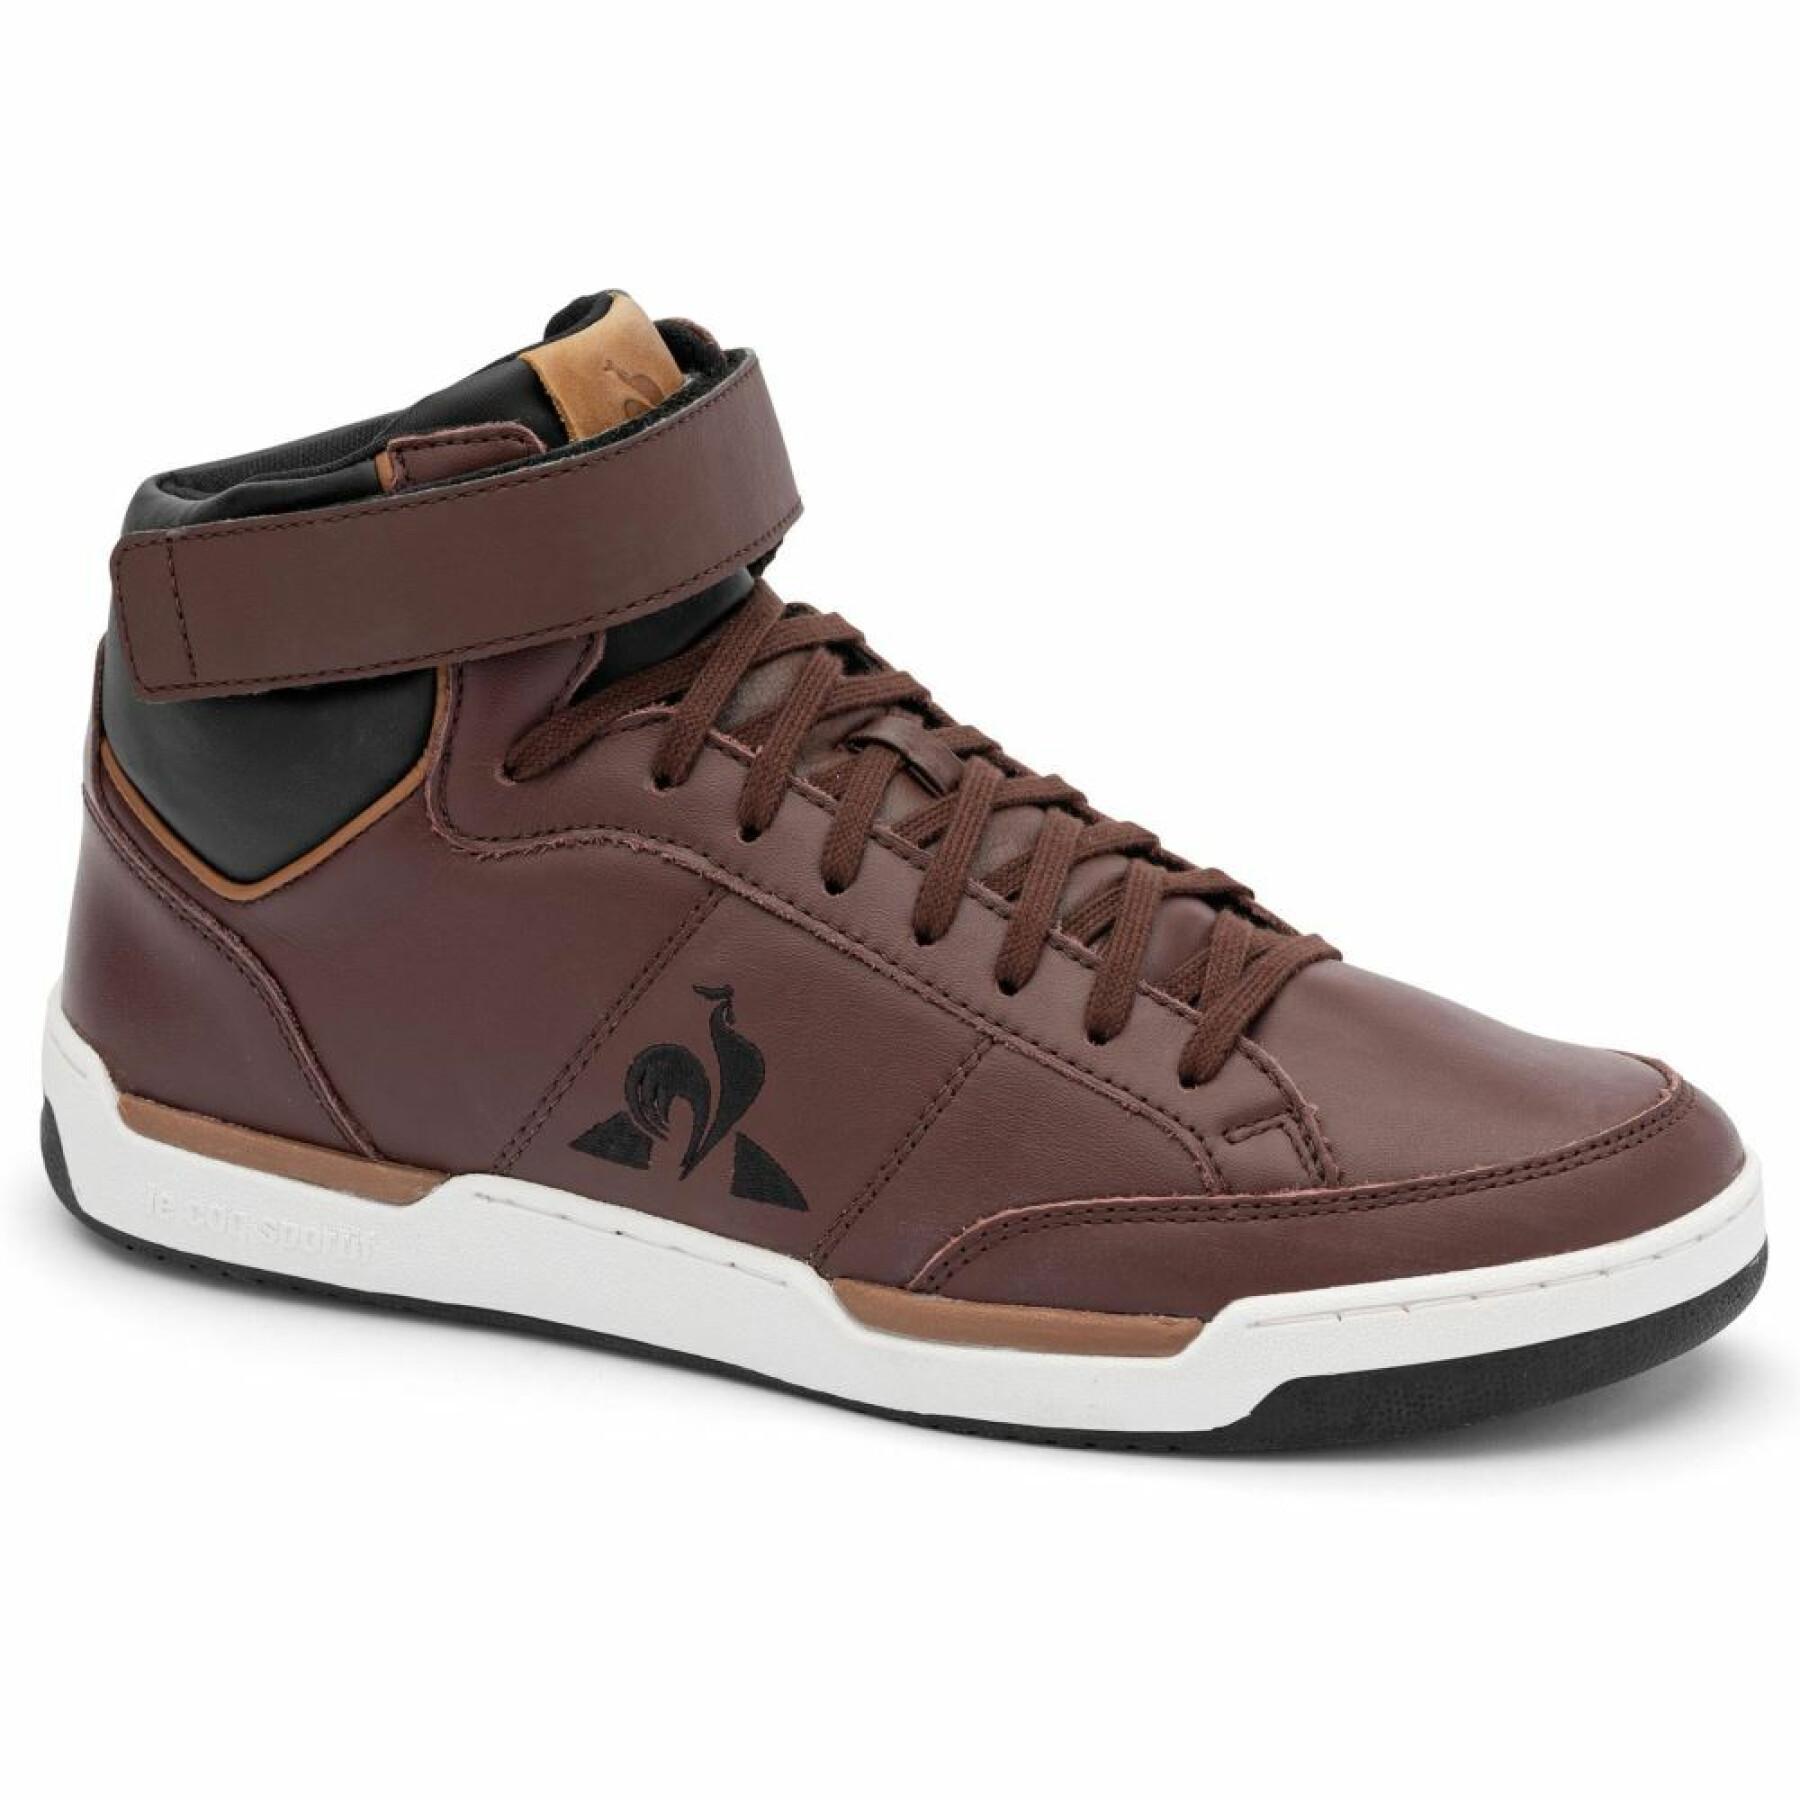 Trainers Le Coq Sportif Field Leather Mix